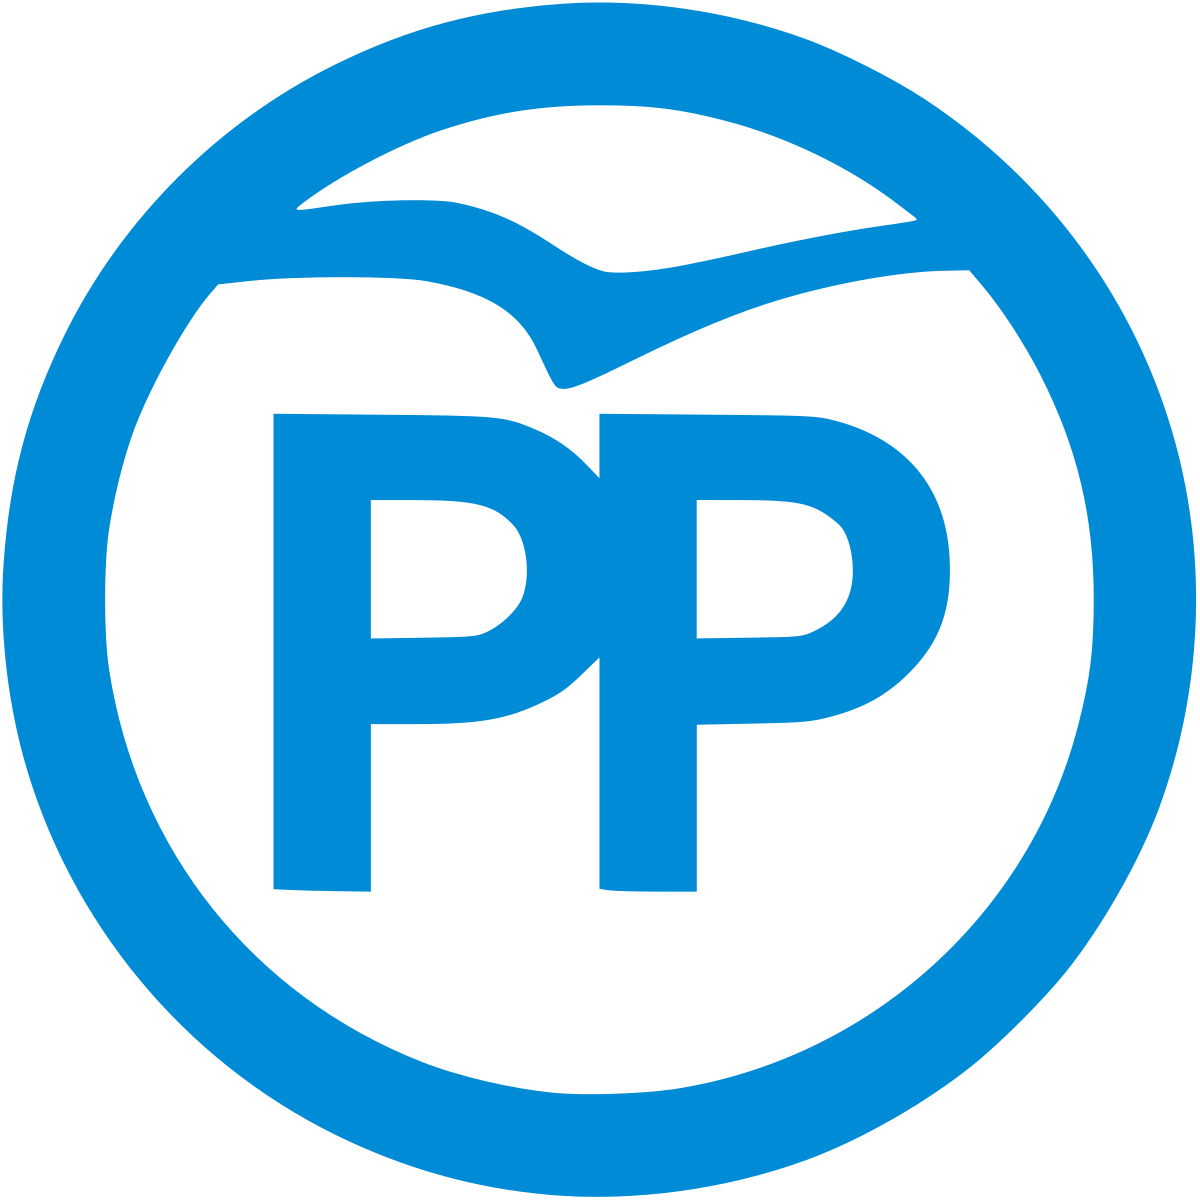 Pp Logo - People's Party (Spain)